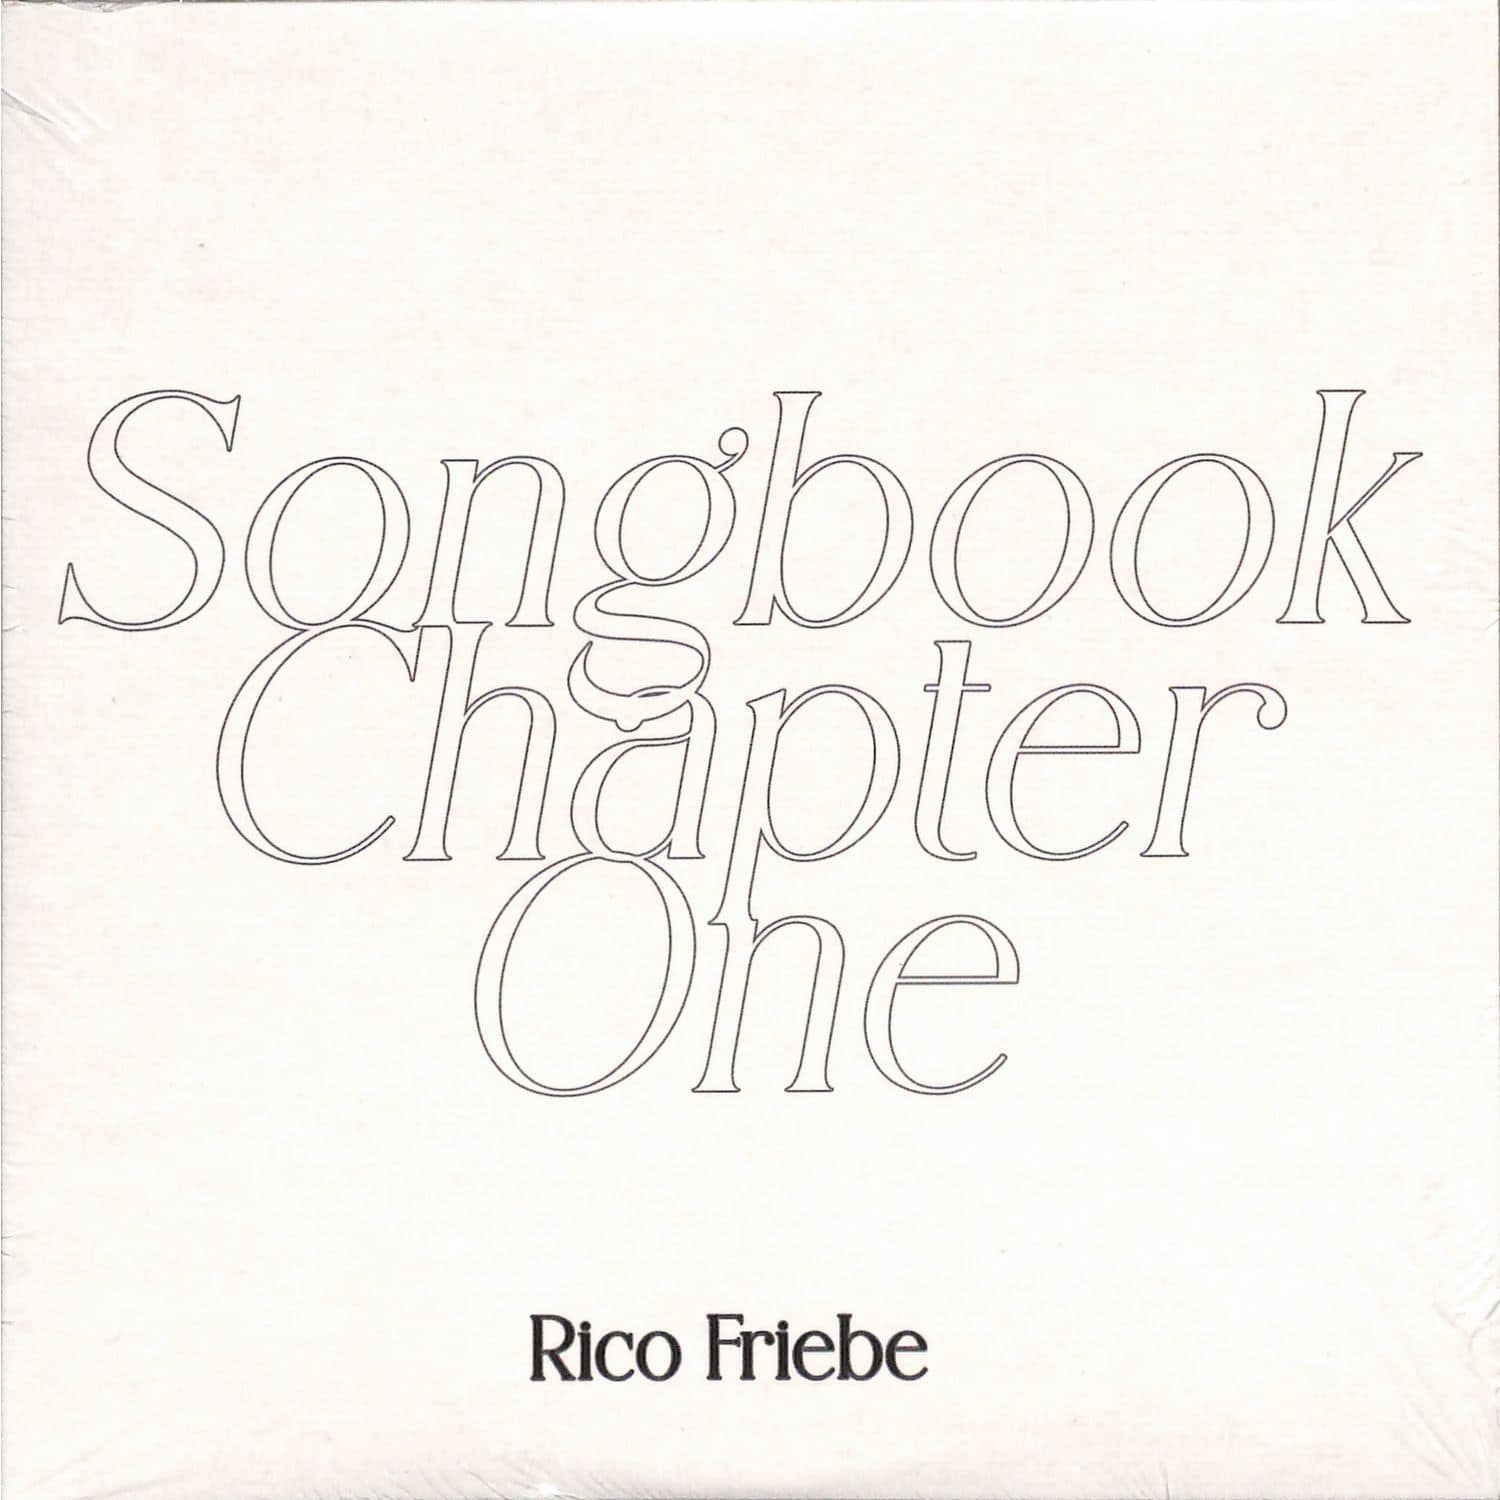 Rico Friebe - SONGBOOK / CHAPTER ONE 